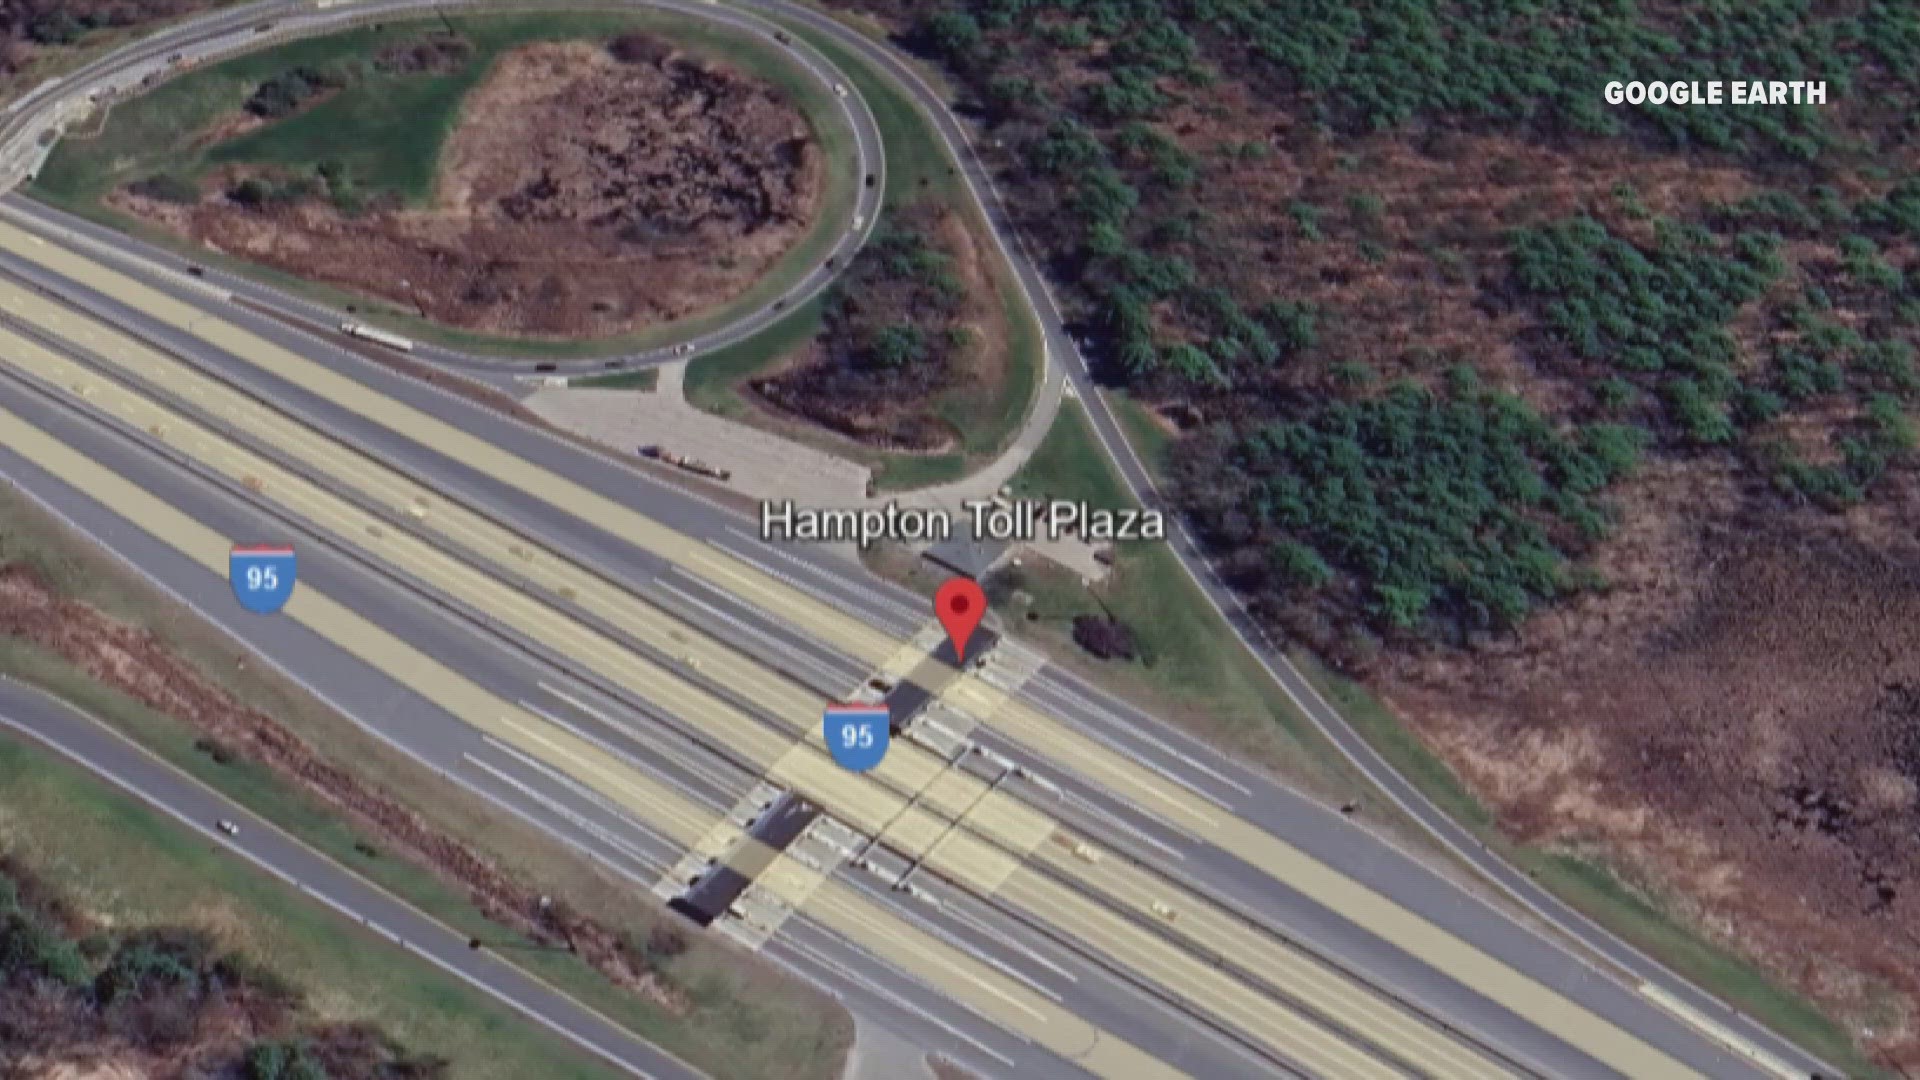 New Hampshire State Police said Patrick Jones "suddenly changed lanes" when approaching the toll plaza, hit a concrete structure, and his truck caught fire.